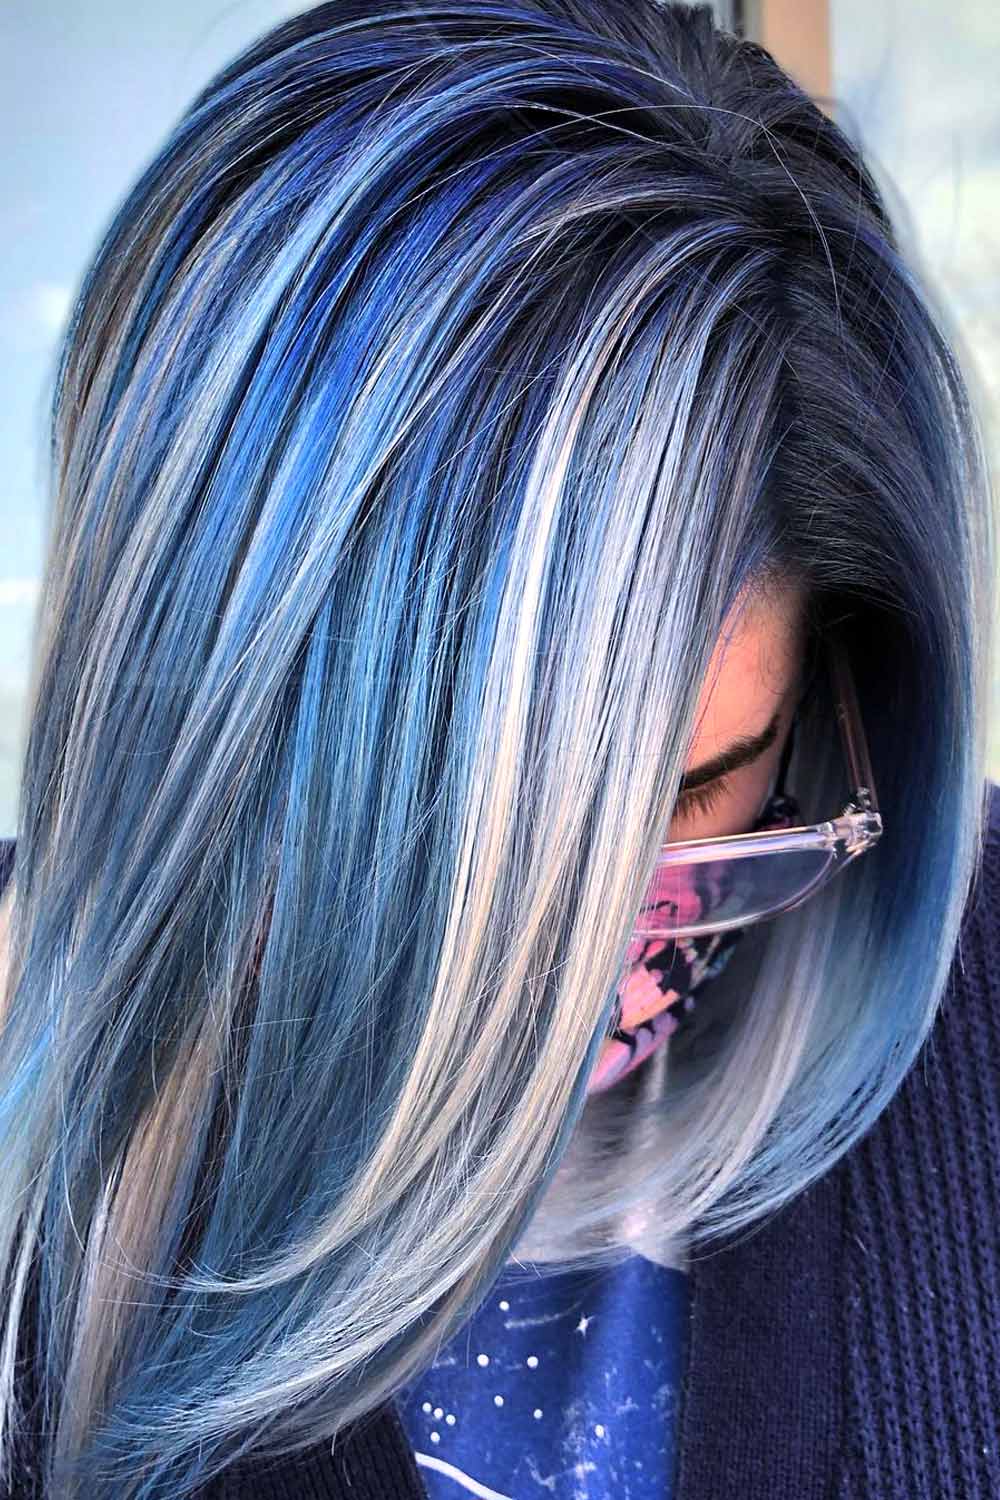 Black and Blonde Hair with Colorful Streaks #blackandblondehair #blackhair #blondehair